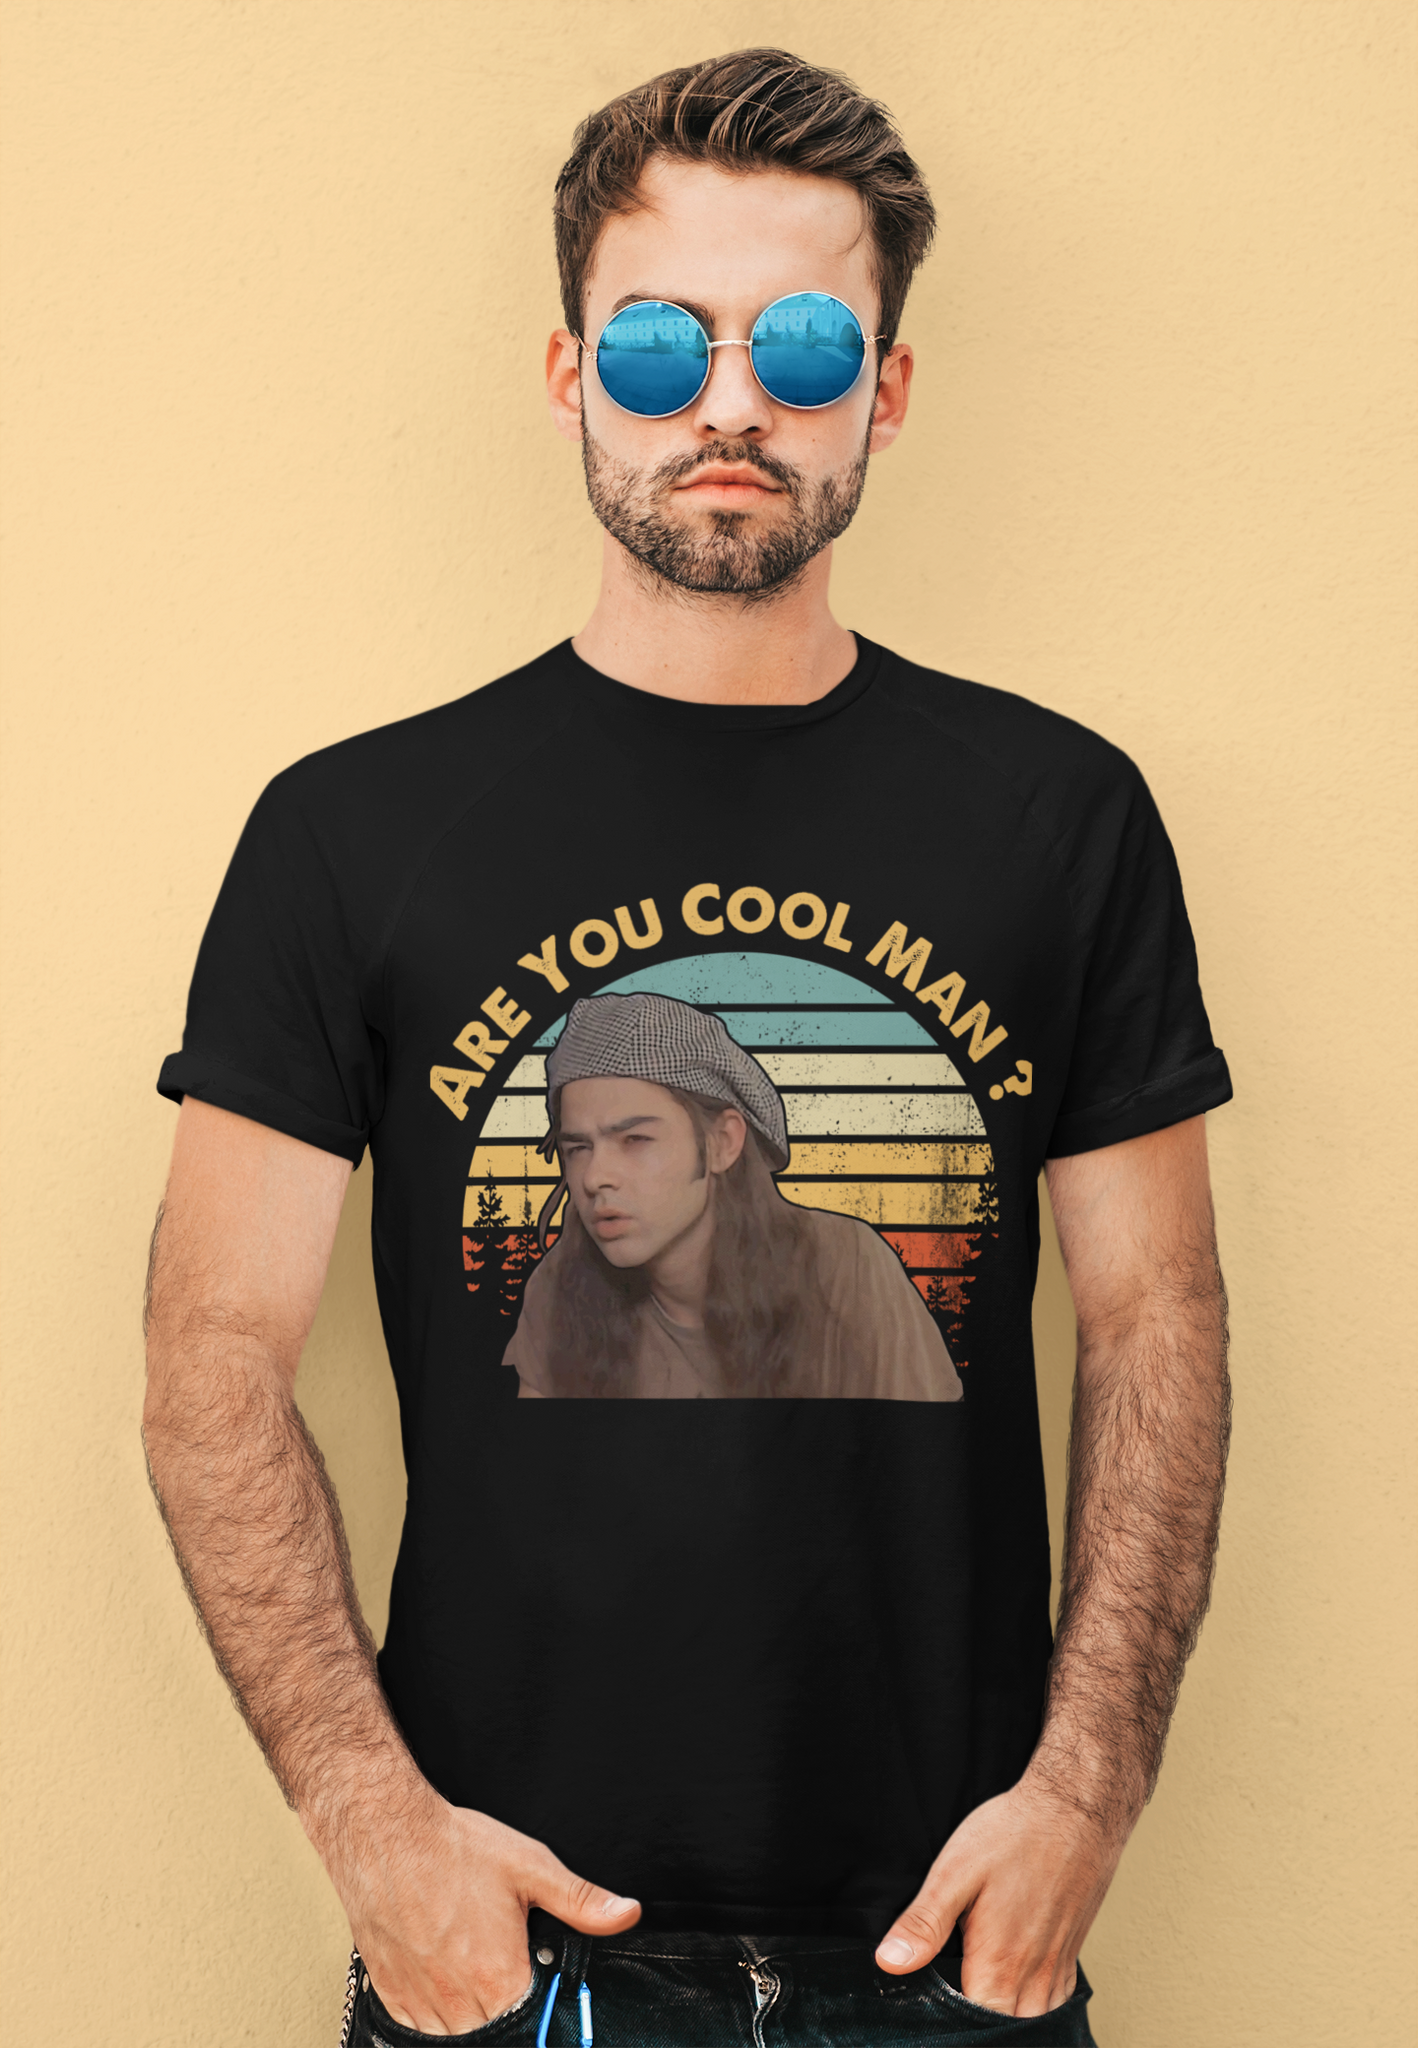 Dazed And Confused T Shirt, Ron Slater T Shirt, Are You Cool Man Tshirt